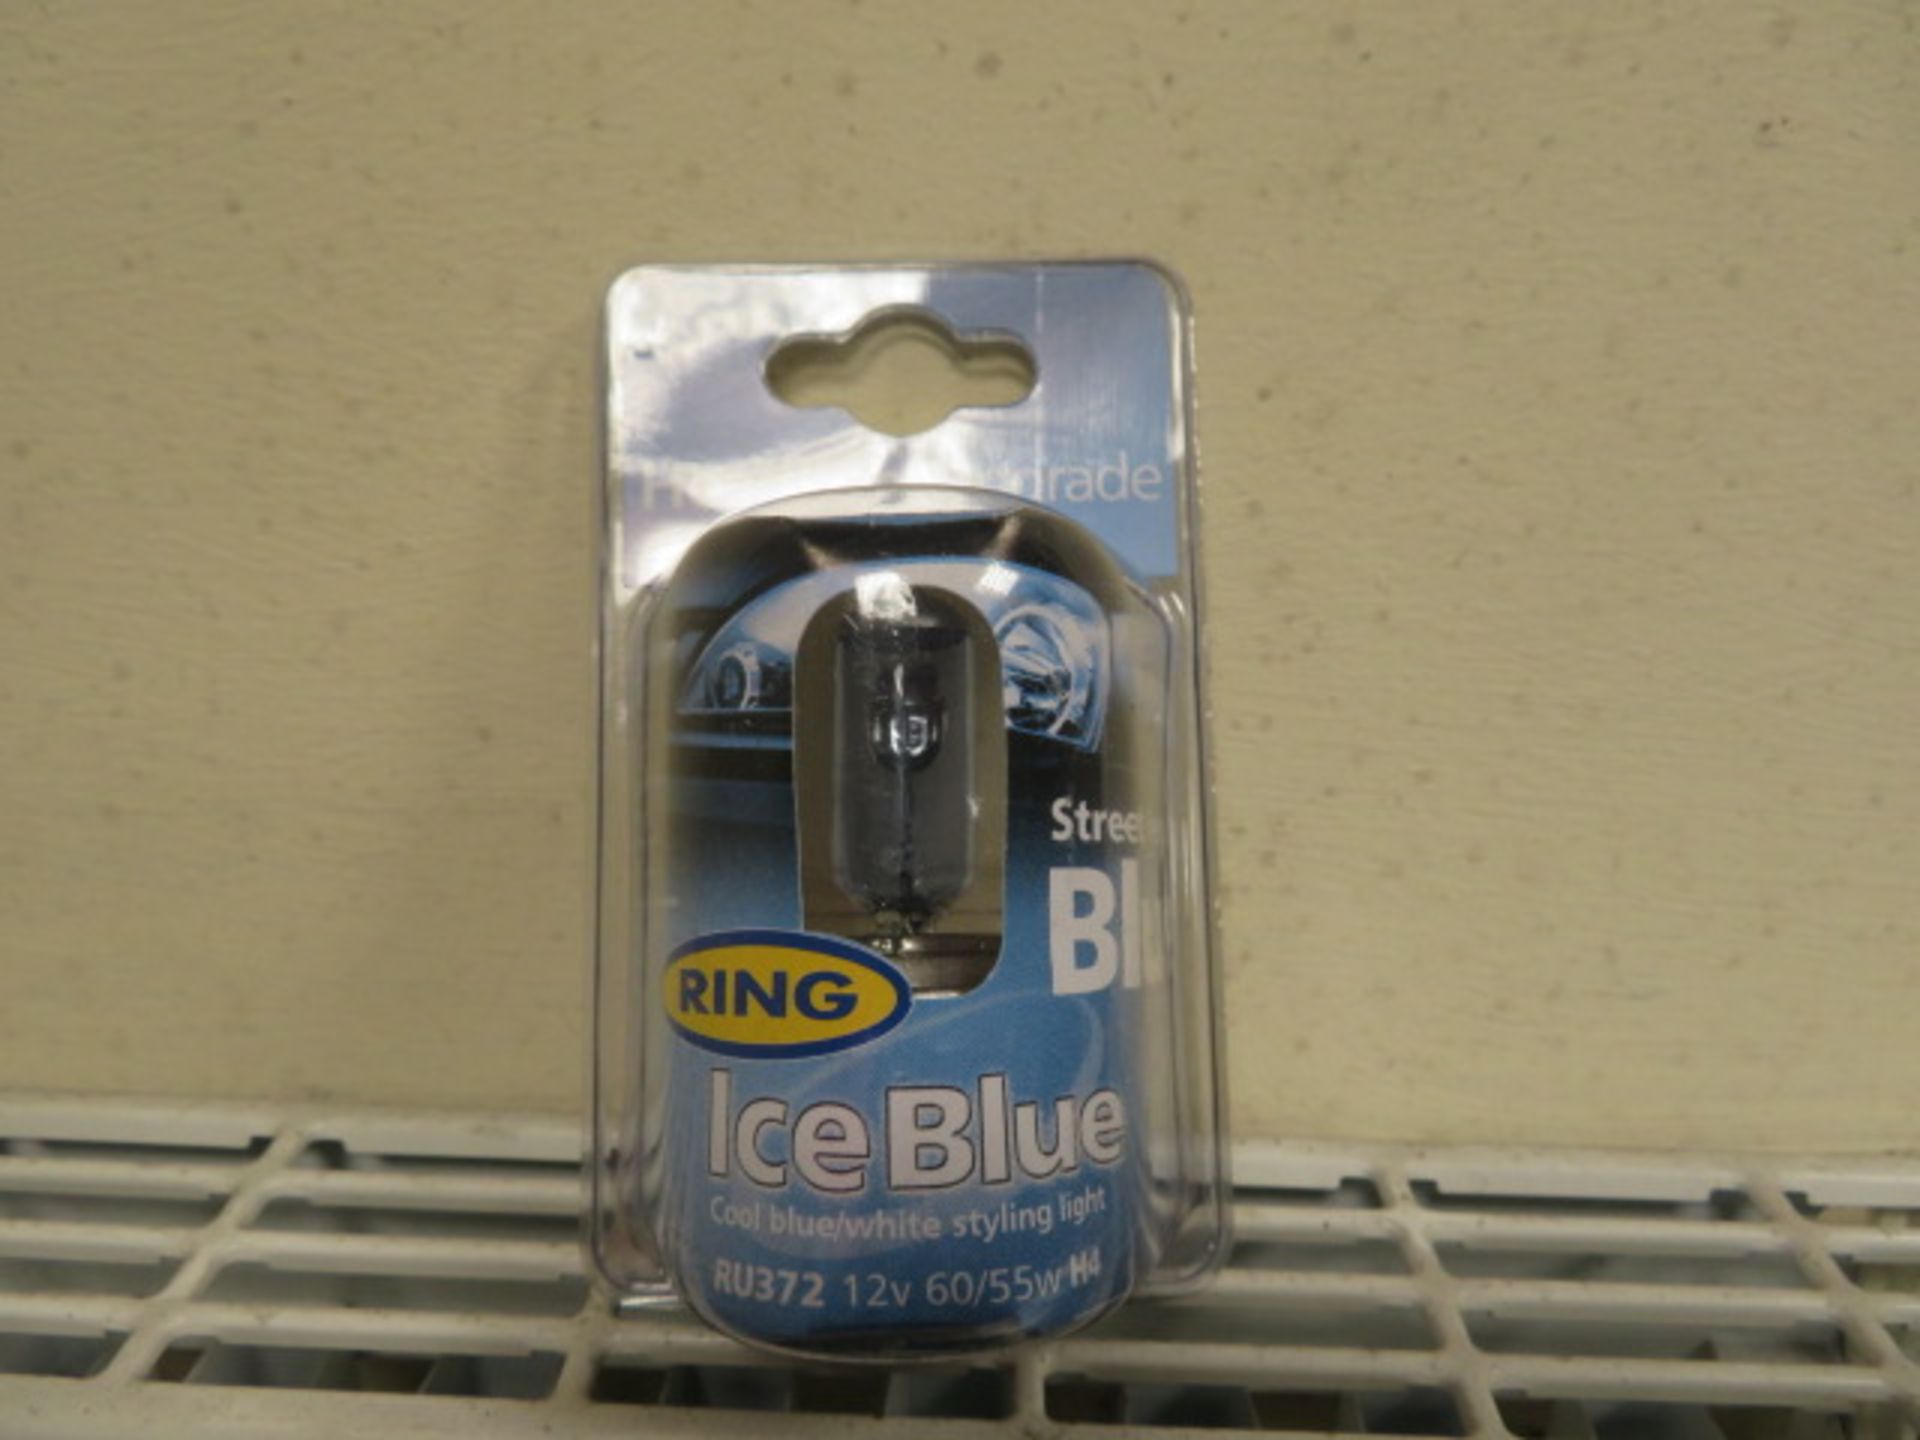 10 X RING ICE BLUE HEADLIGHT BULB 12V 60/55W H4 2 PACK. UK DELIVERY AVAILABLE FROM £14 PLUS V...